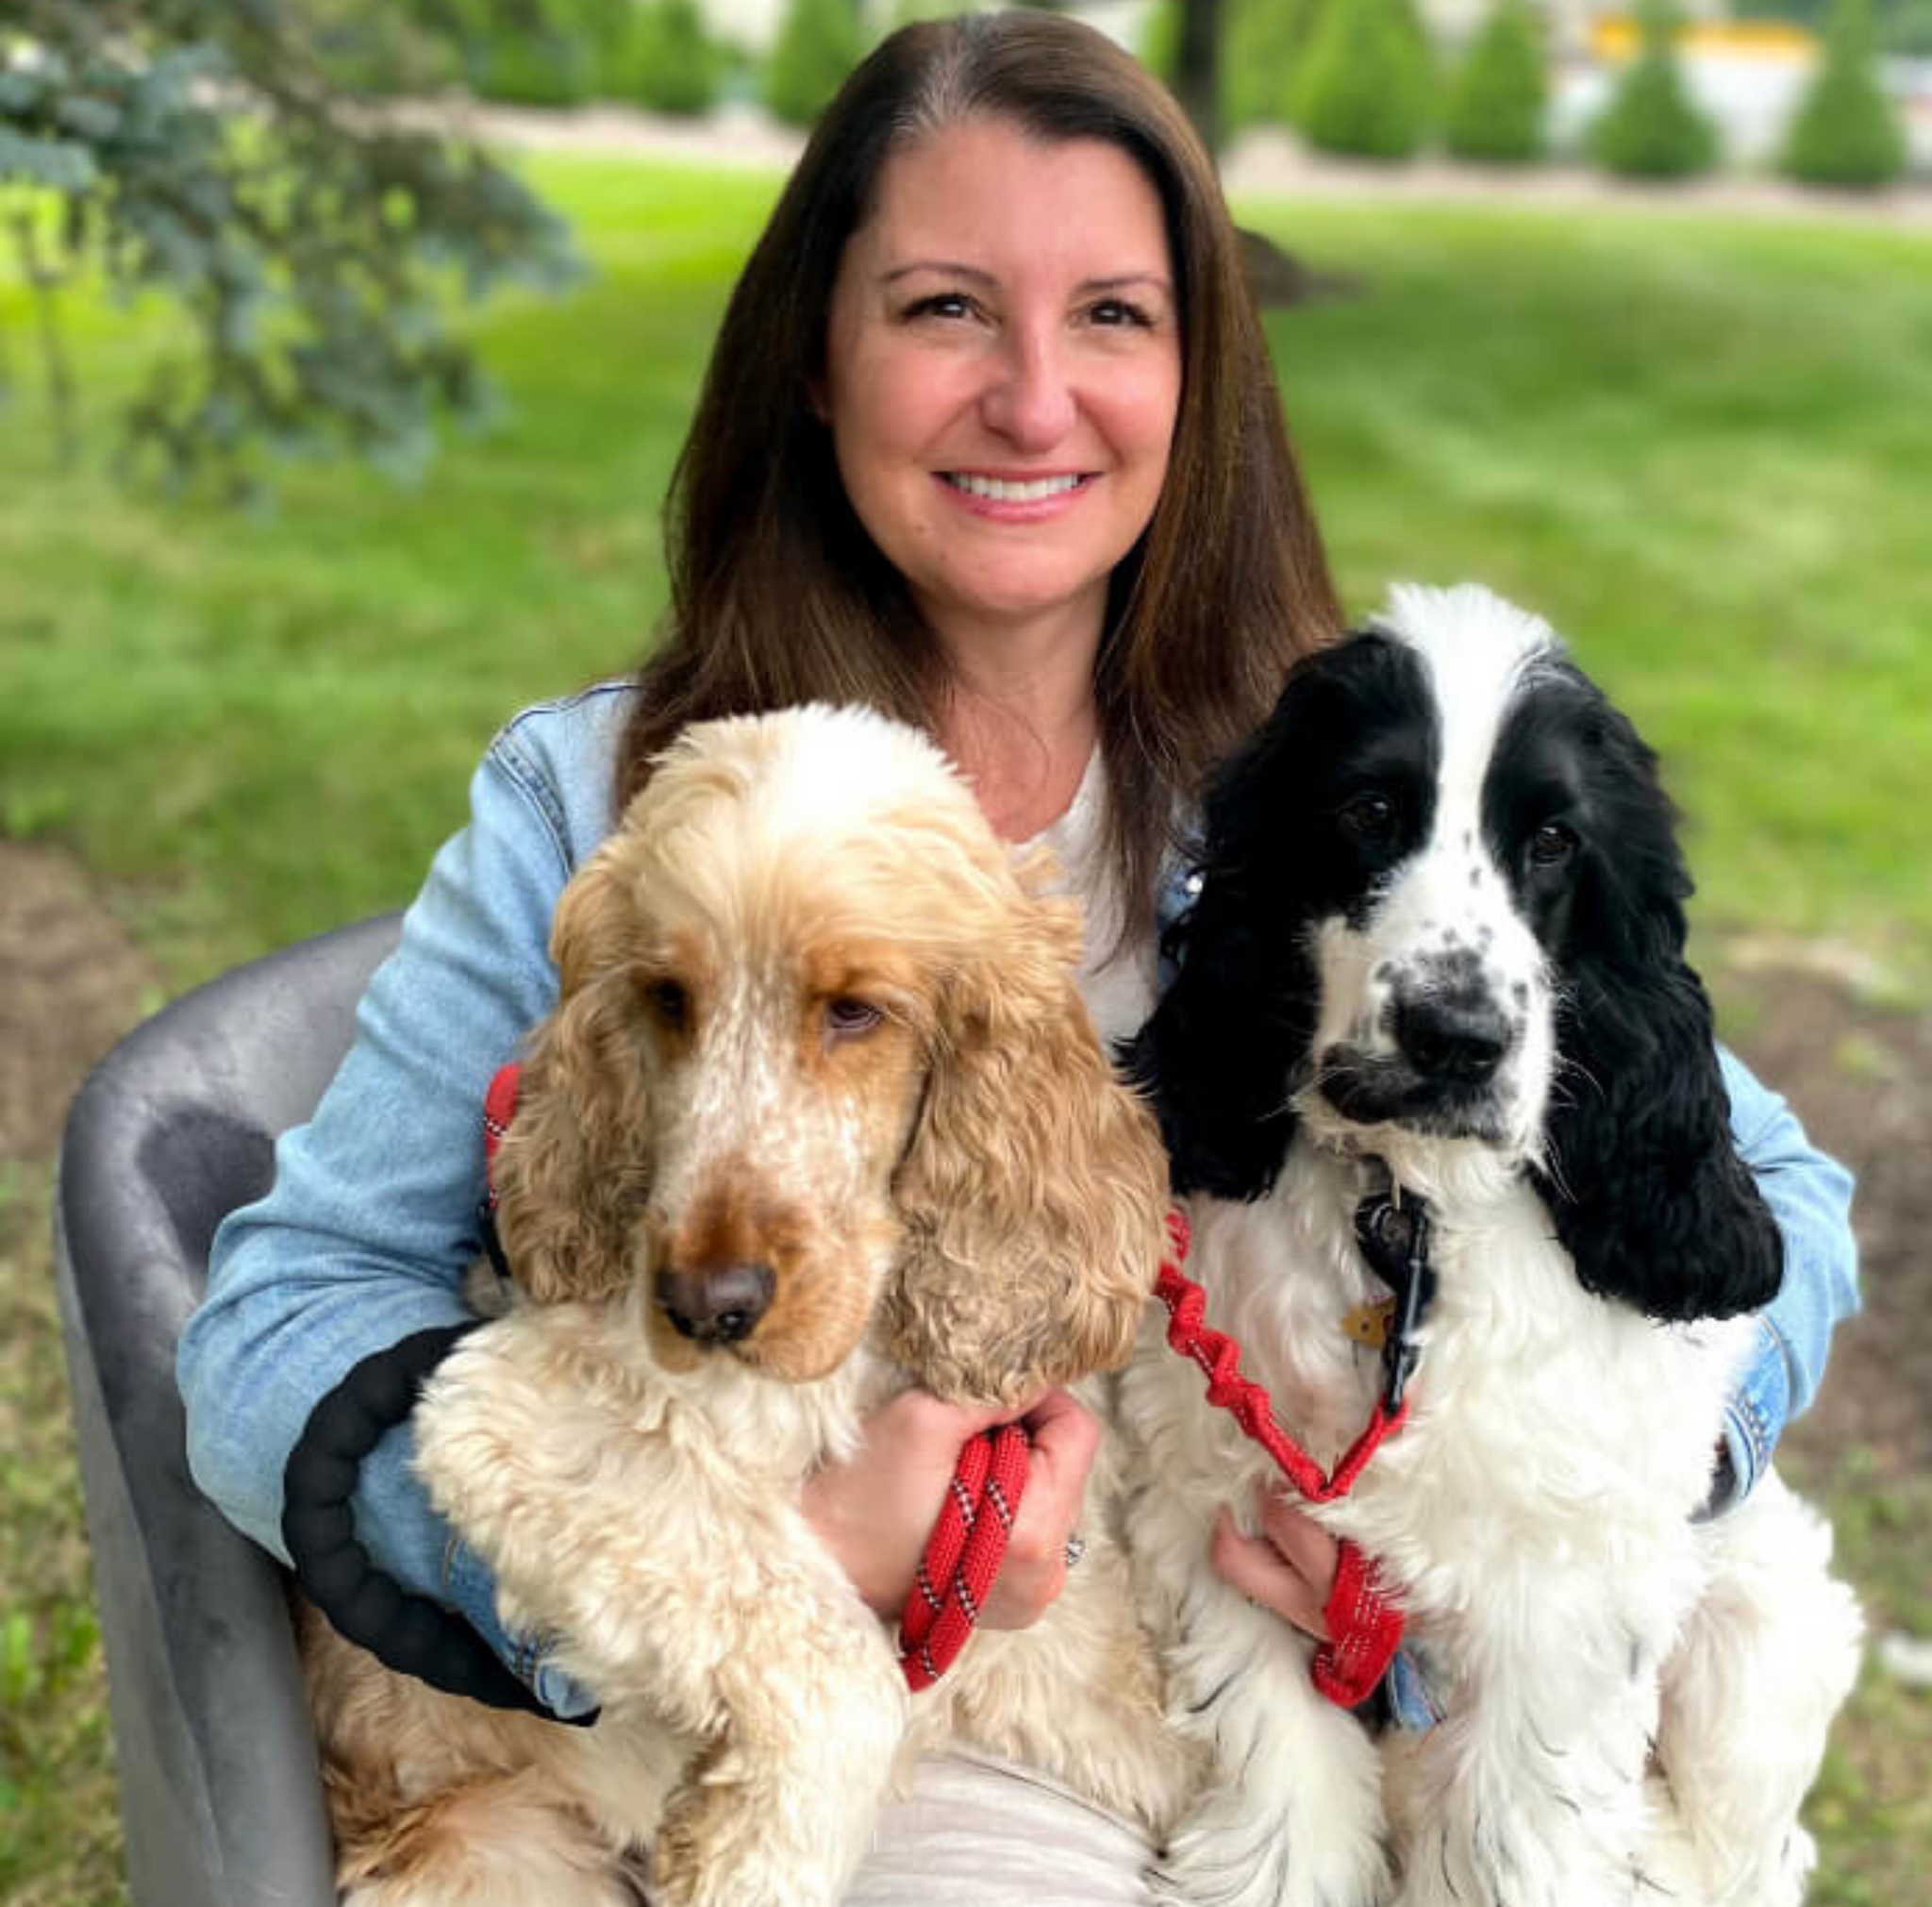 Theresa Brown, Product Development Manager, posed with two dogs, Hennessy and Stella